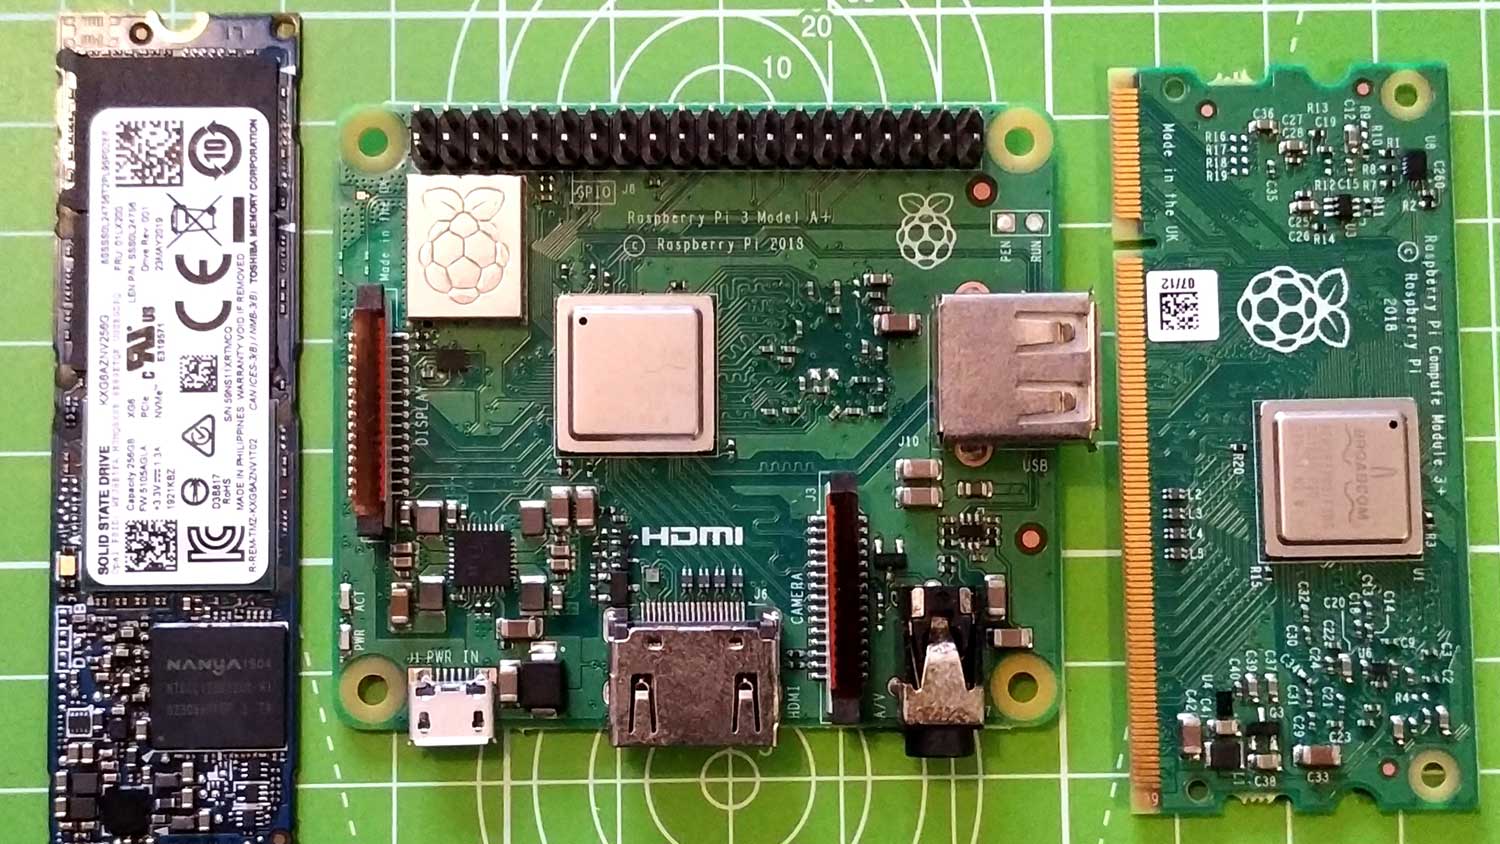 Two PCIe-to-USB bridge chip solution to use NVMe SSD on your Raspberry Pi 4  - Latest Open Tech From Seeed